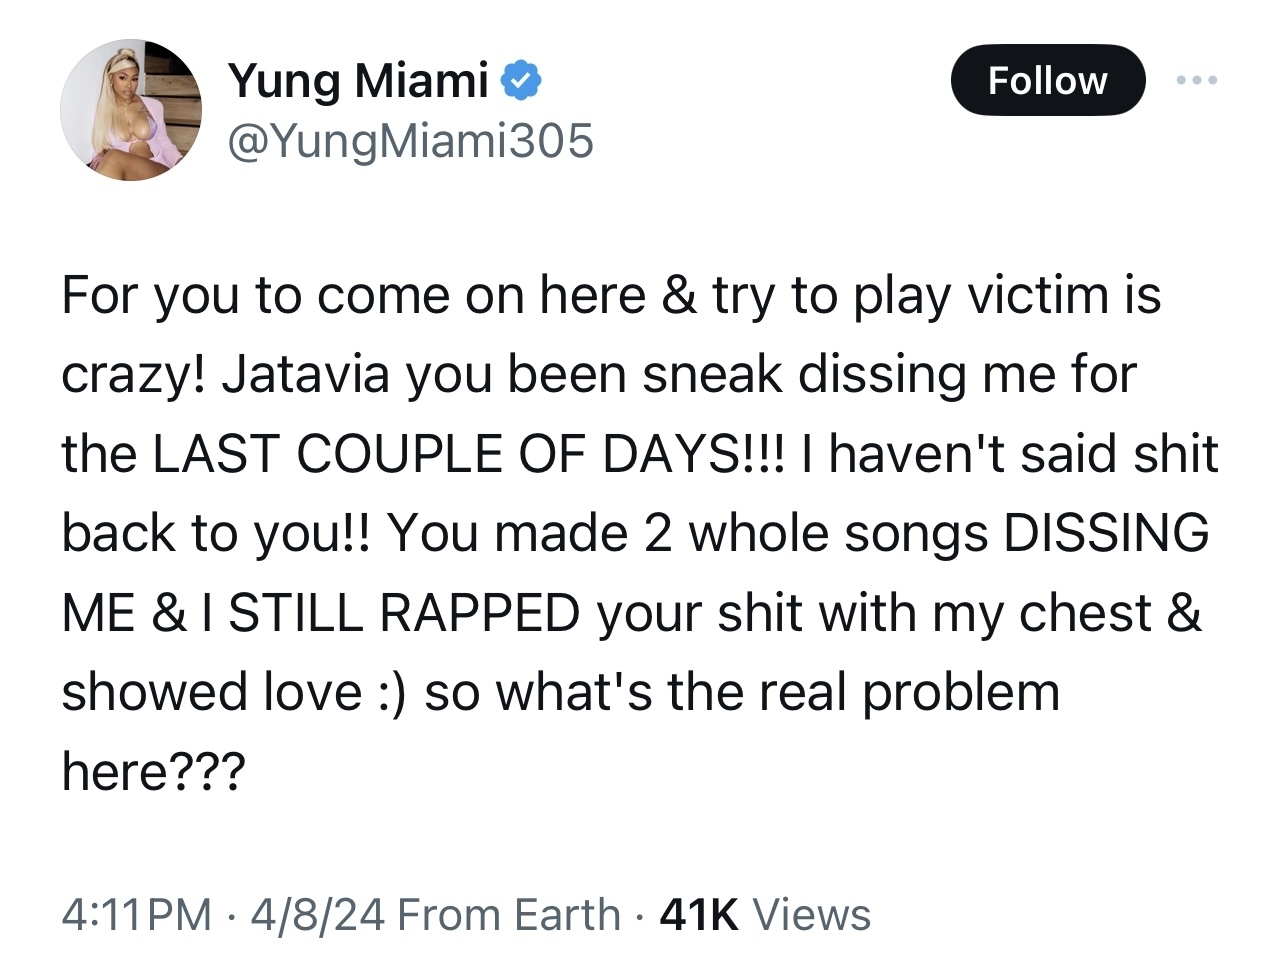 Tweet by Yung Miami expressing confusion and frustration about someone sneak dissing her while she supported their work, asking about the real problem